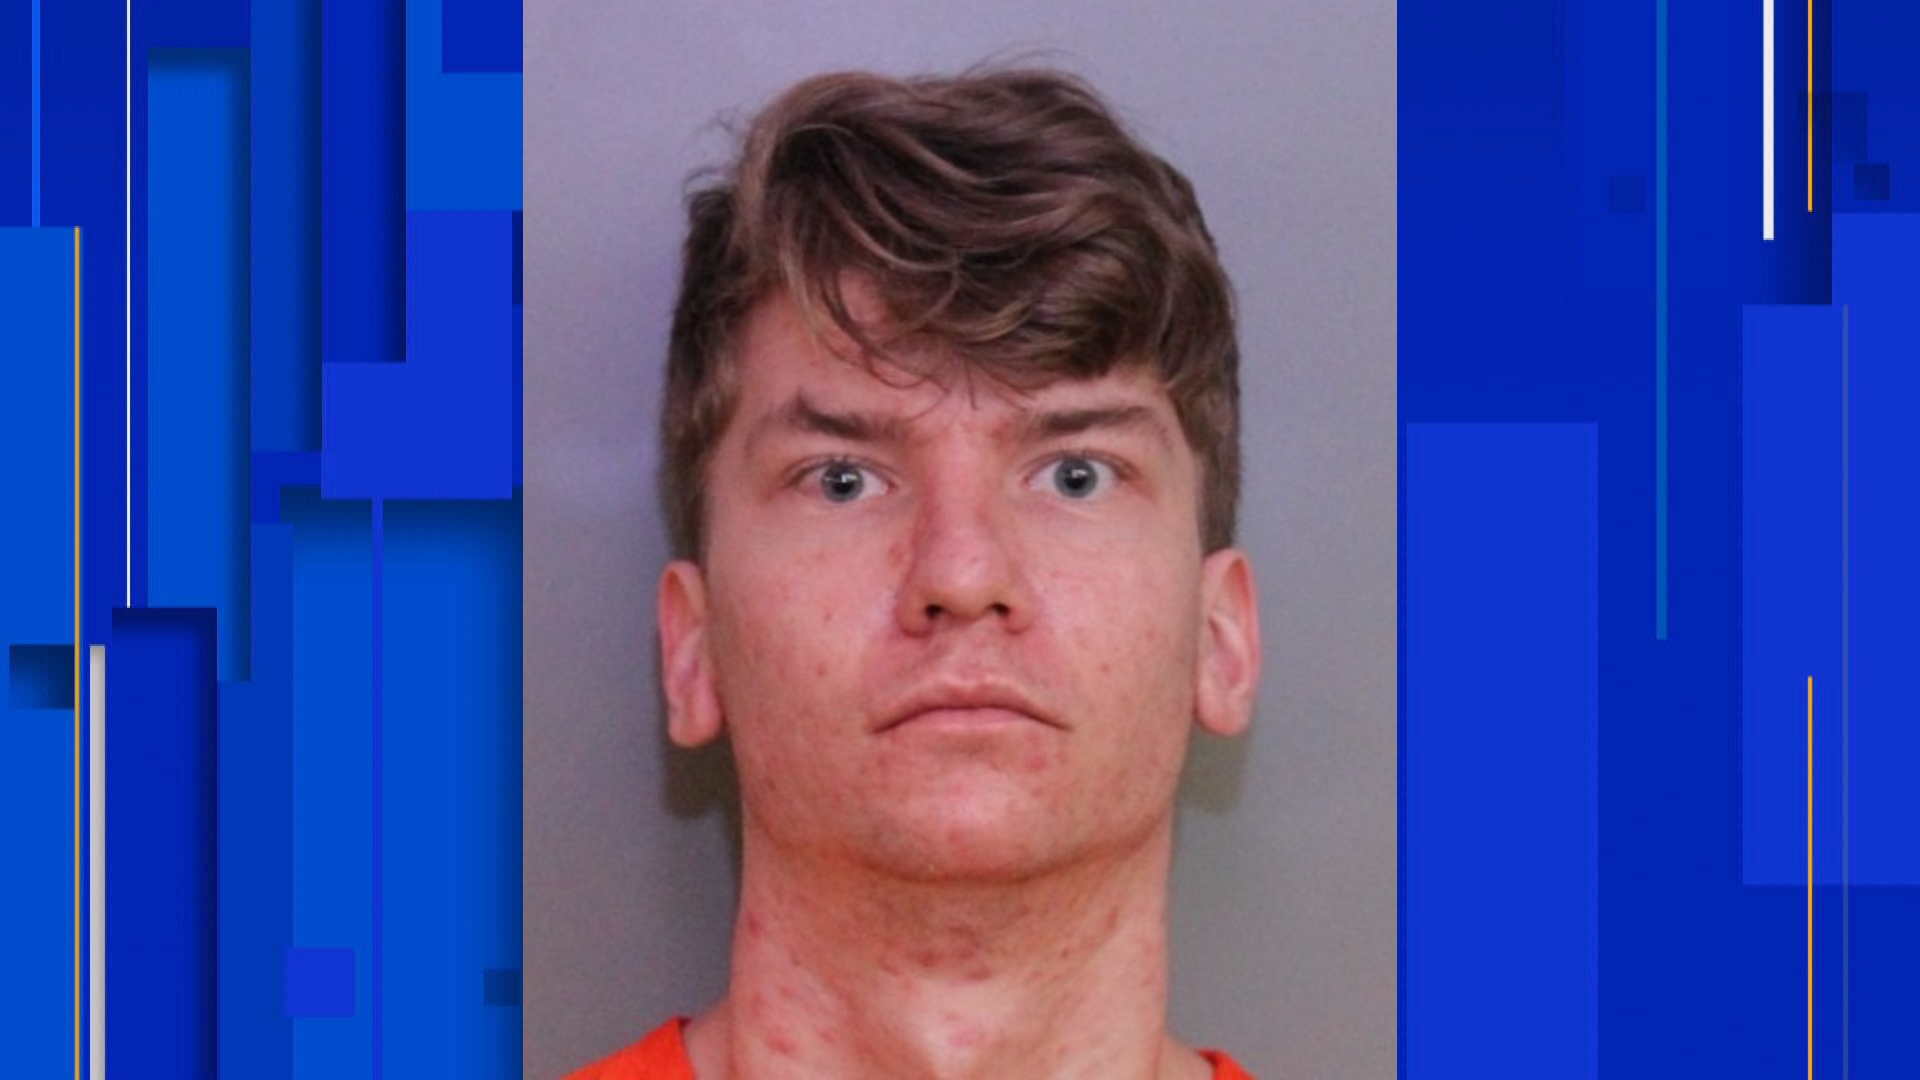 19-year-old arrested for child pornography, aggressive pursuit of a 10-year- old girl